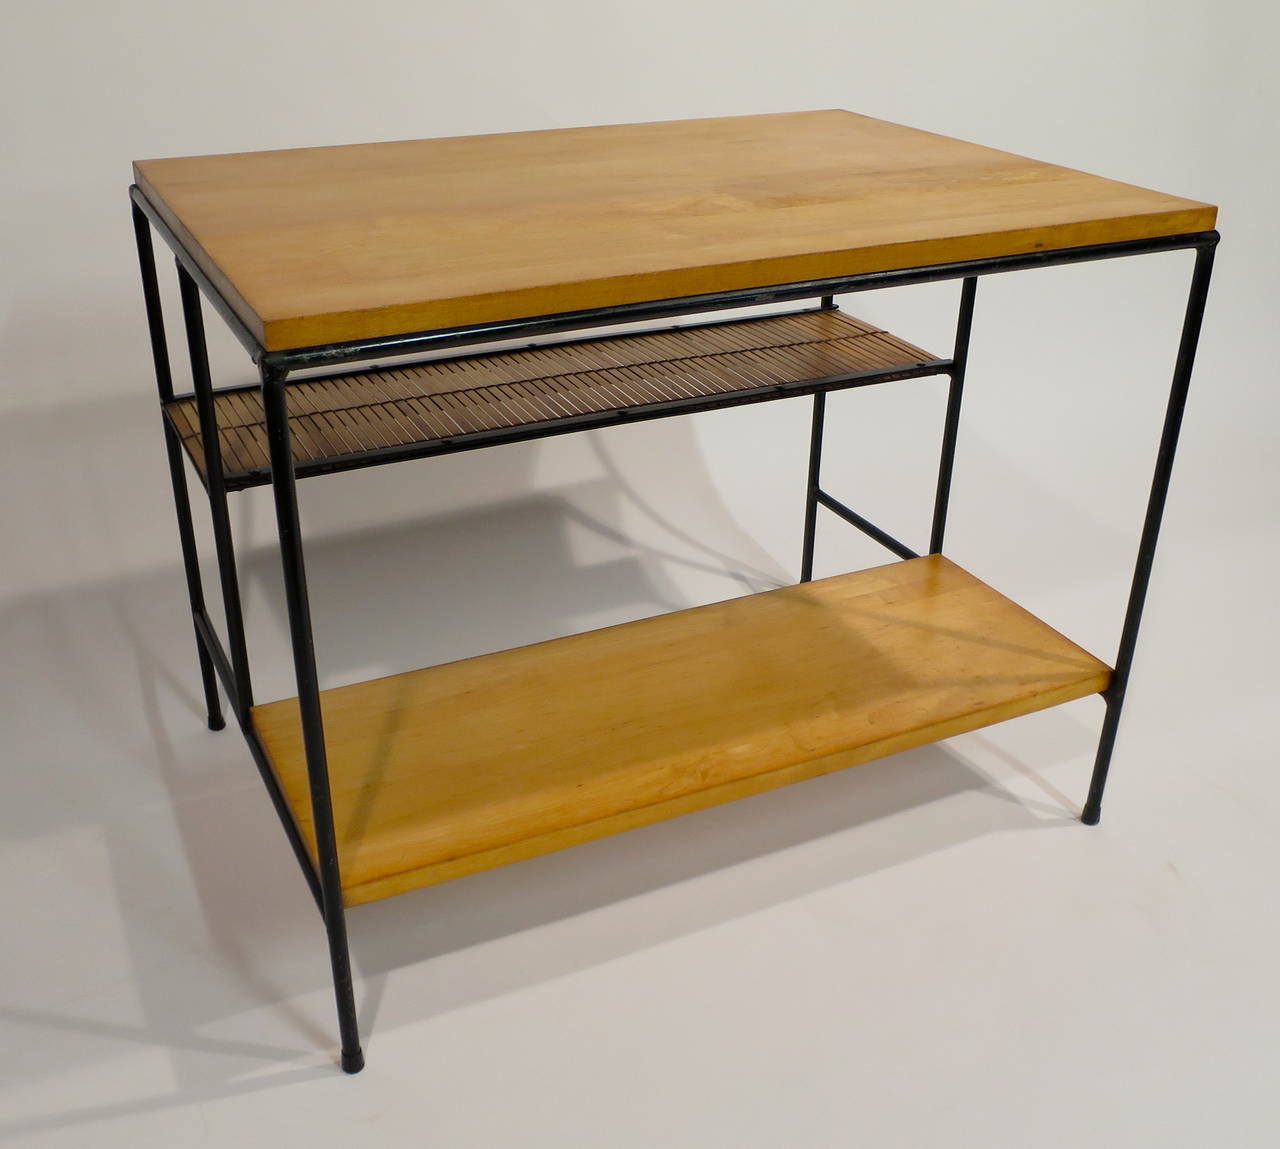 Paul McCobb 'Planner Group' Three-Tier Iron and Wood Table.  Circa 1950's.